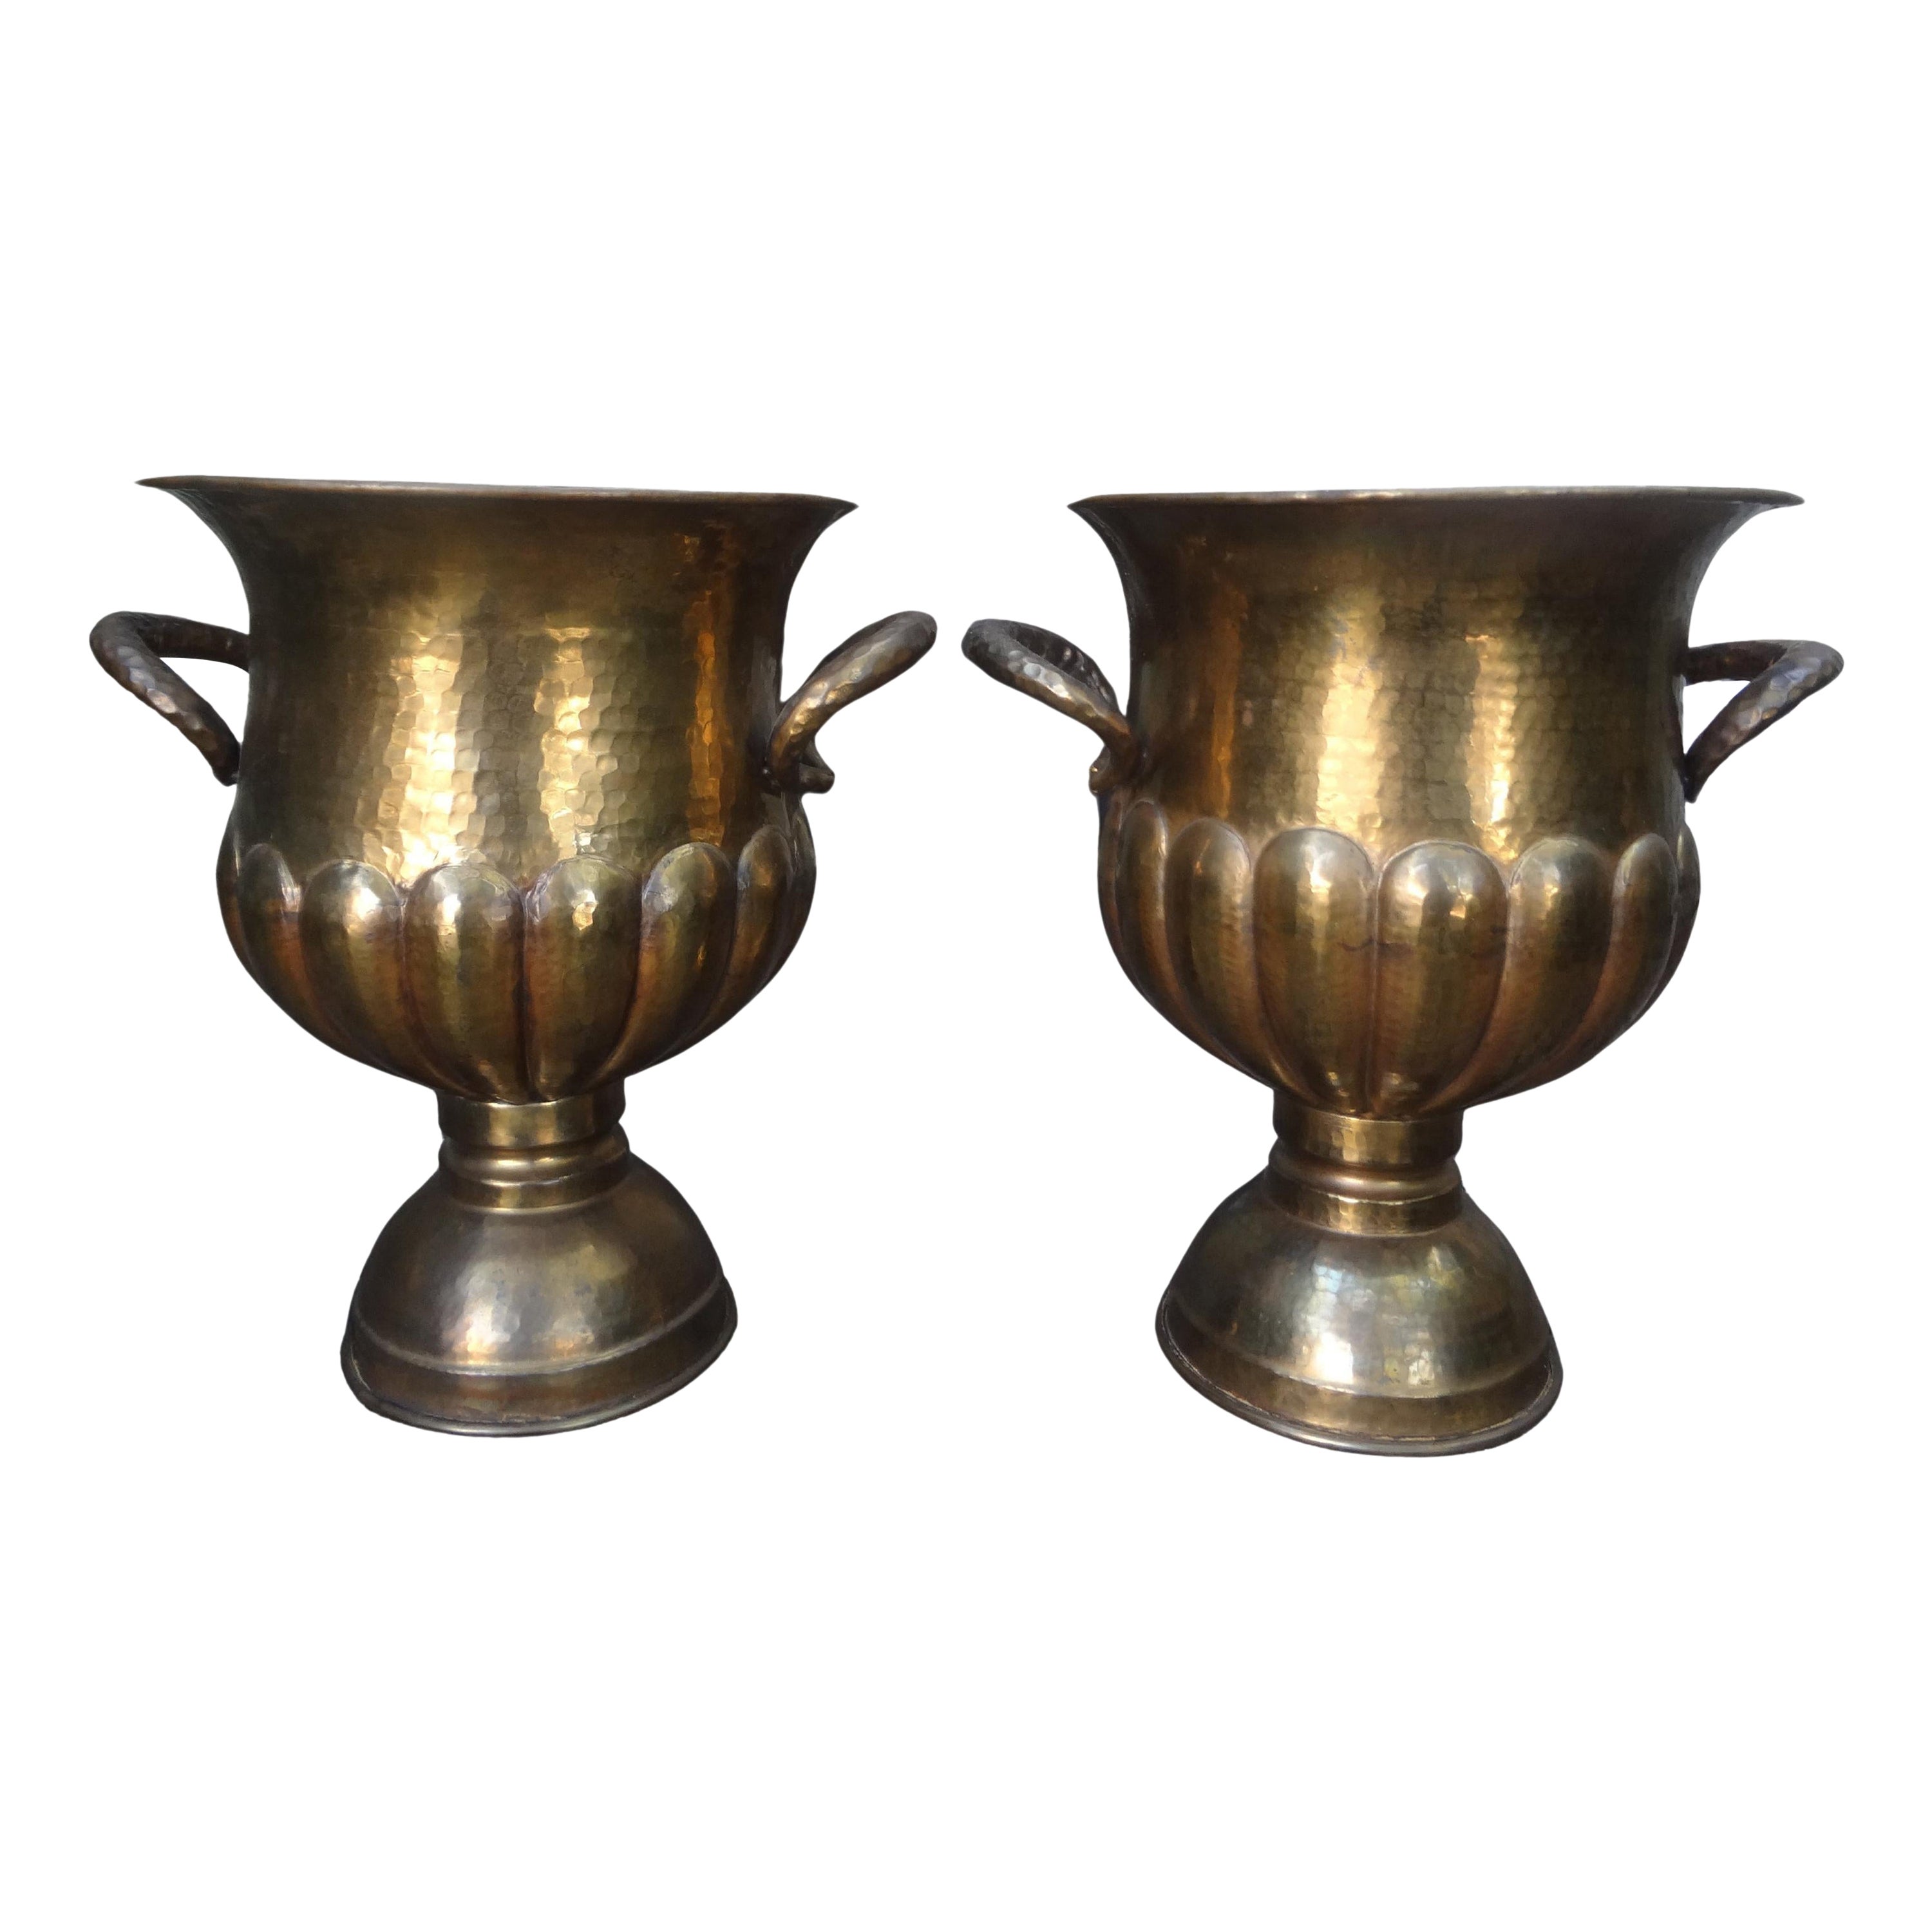 Pair of Vintage Italian Brass Wine or Champagne Coolers For Sale